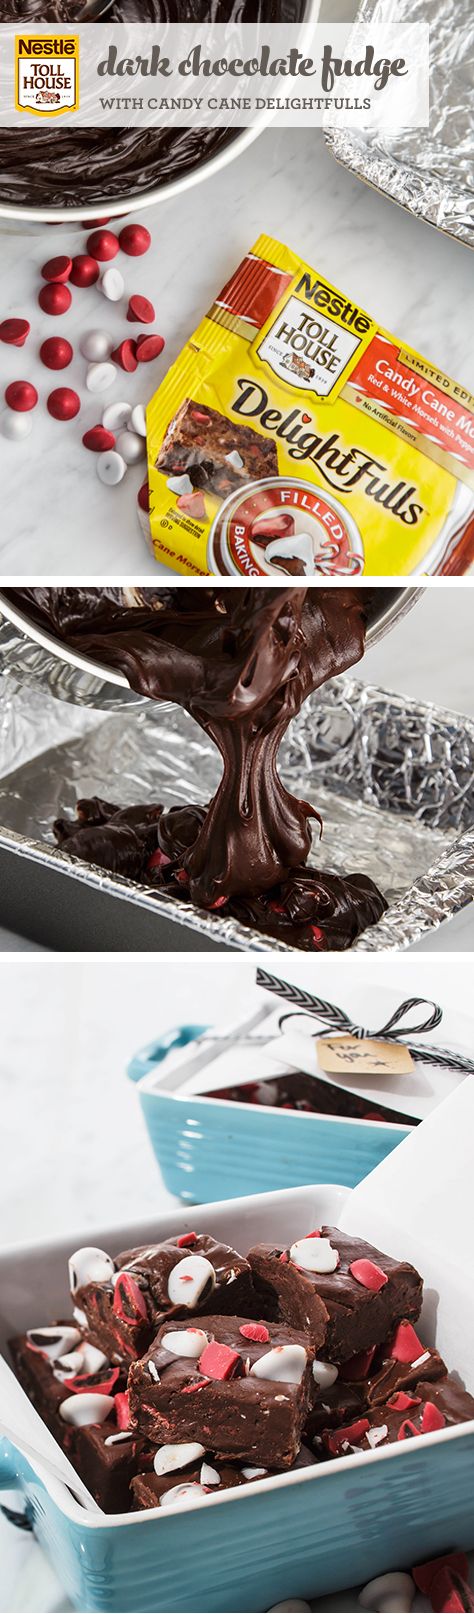 Dark Chocolate Fudge with Candy Cane DelightFulls™ – Give your next batch of fudge a little holiday flavor! This classic (and